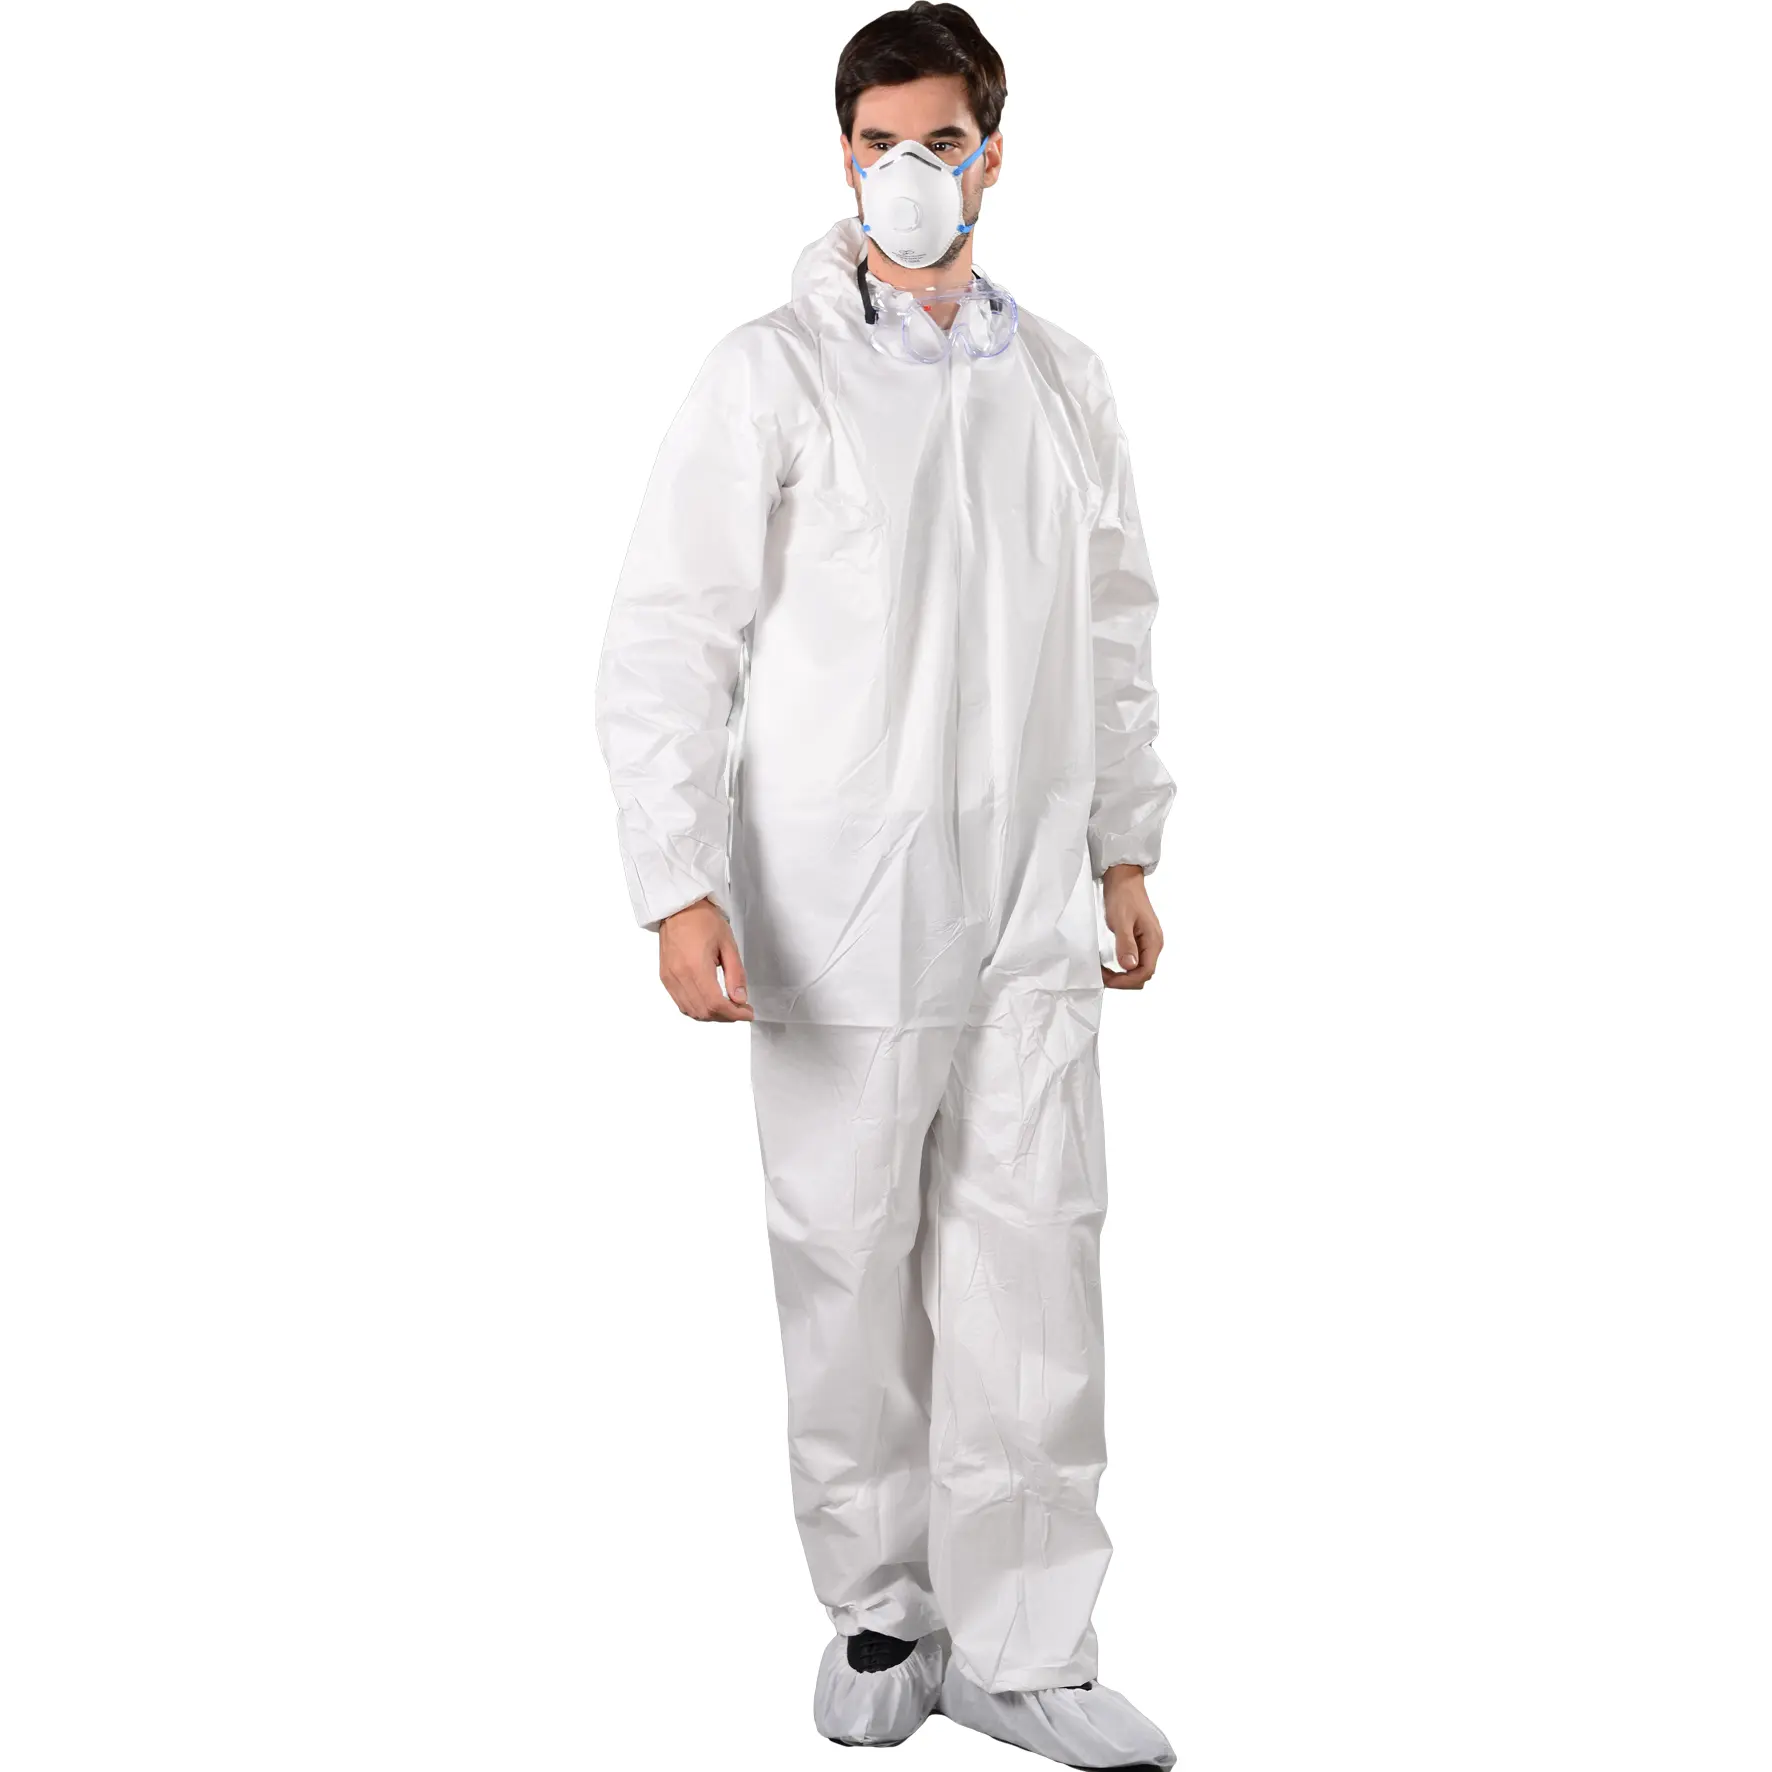 OEM EN13485 Type 6 Ppe Kit Suit Coverall Overall Disposable Coverall Protection Clothes Chemical